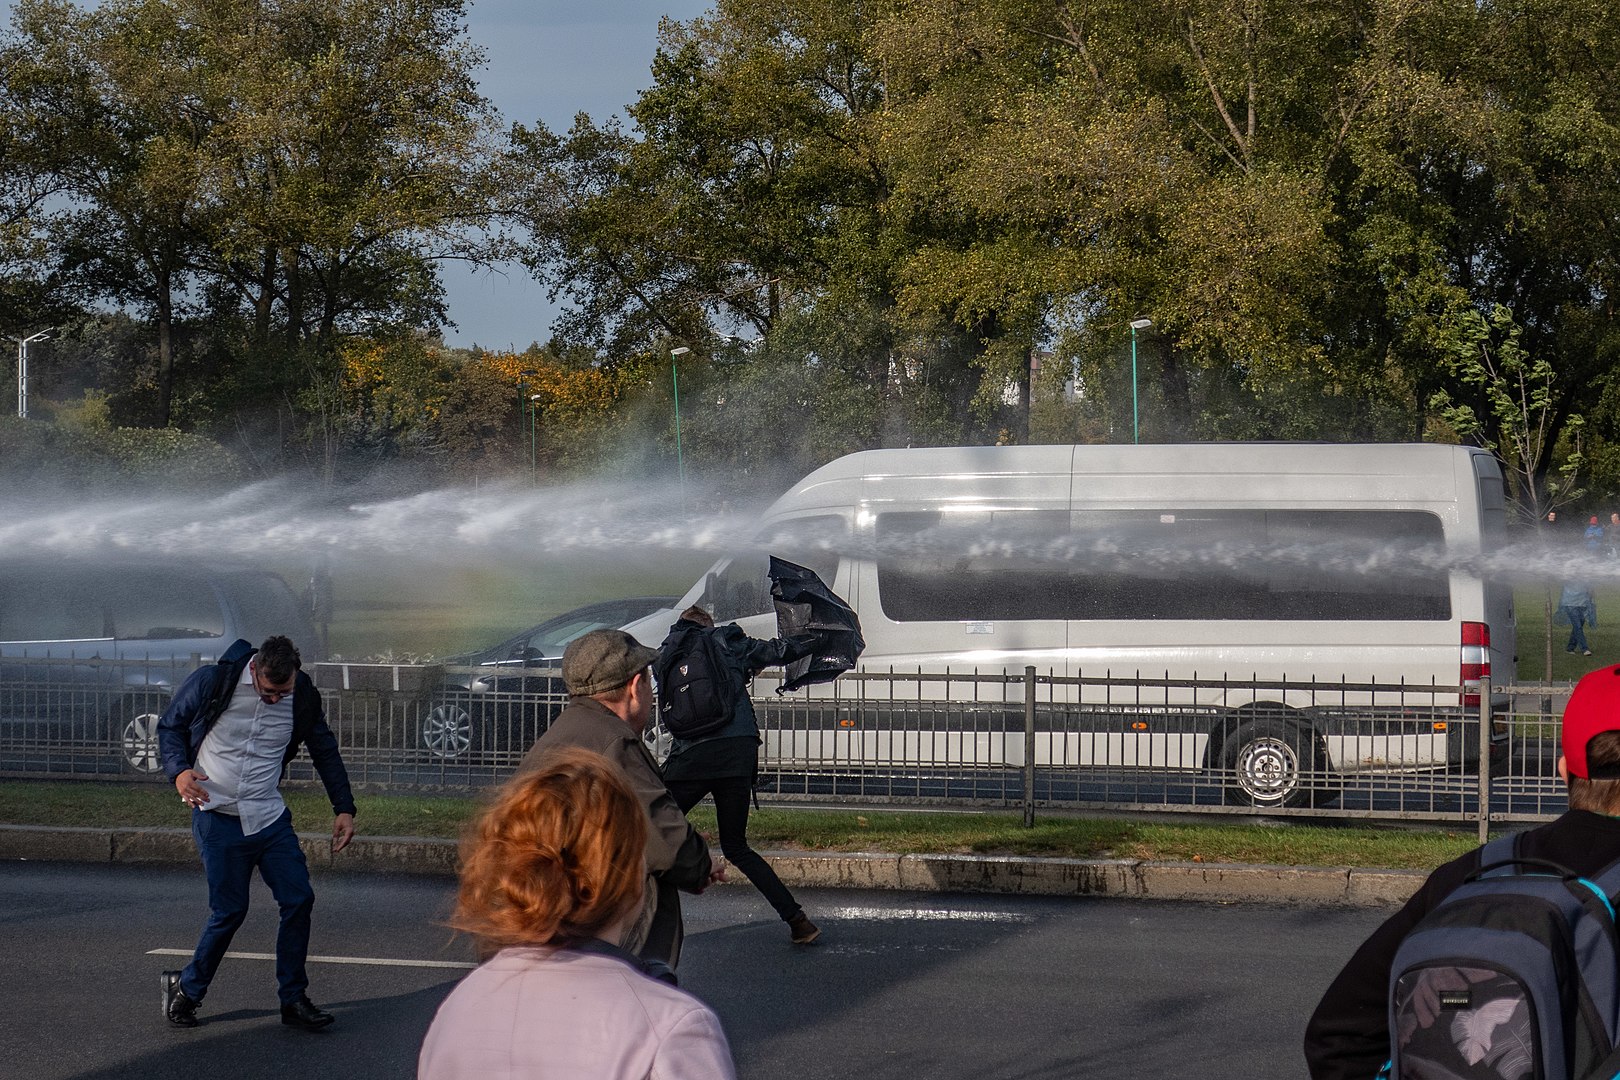 Photo: Use of water cannon during an anti-Lukashenko protest on October 4, 2020. Credit: Wikimedia Commons, Homoatrox